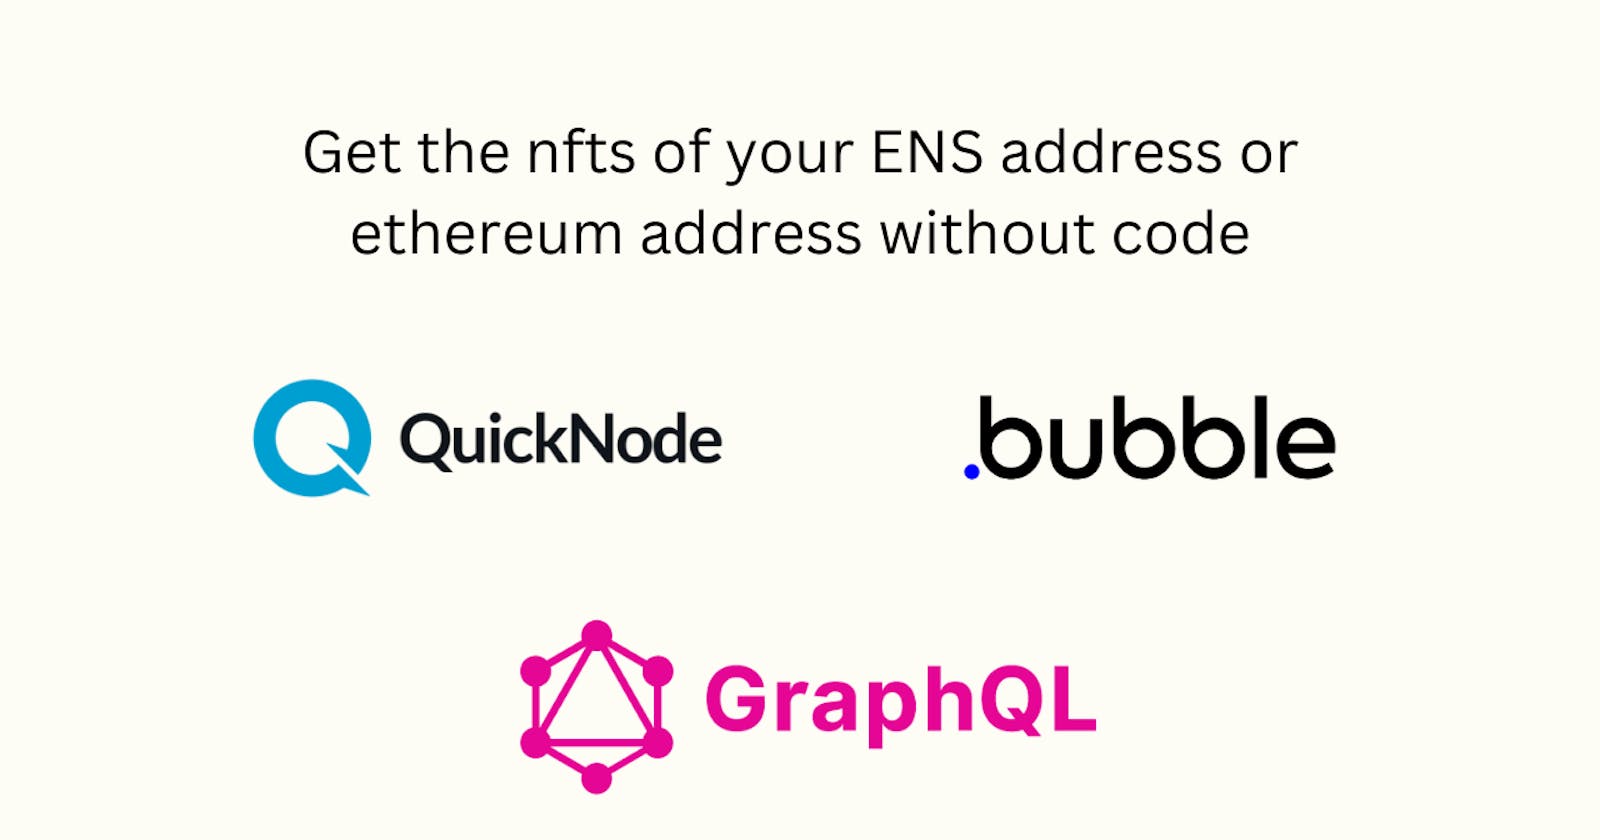 Get the nfts of your ENS address or ethereum address without code